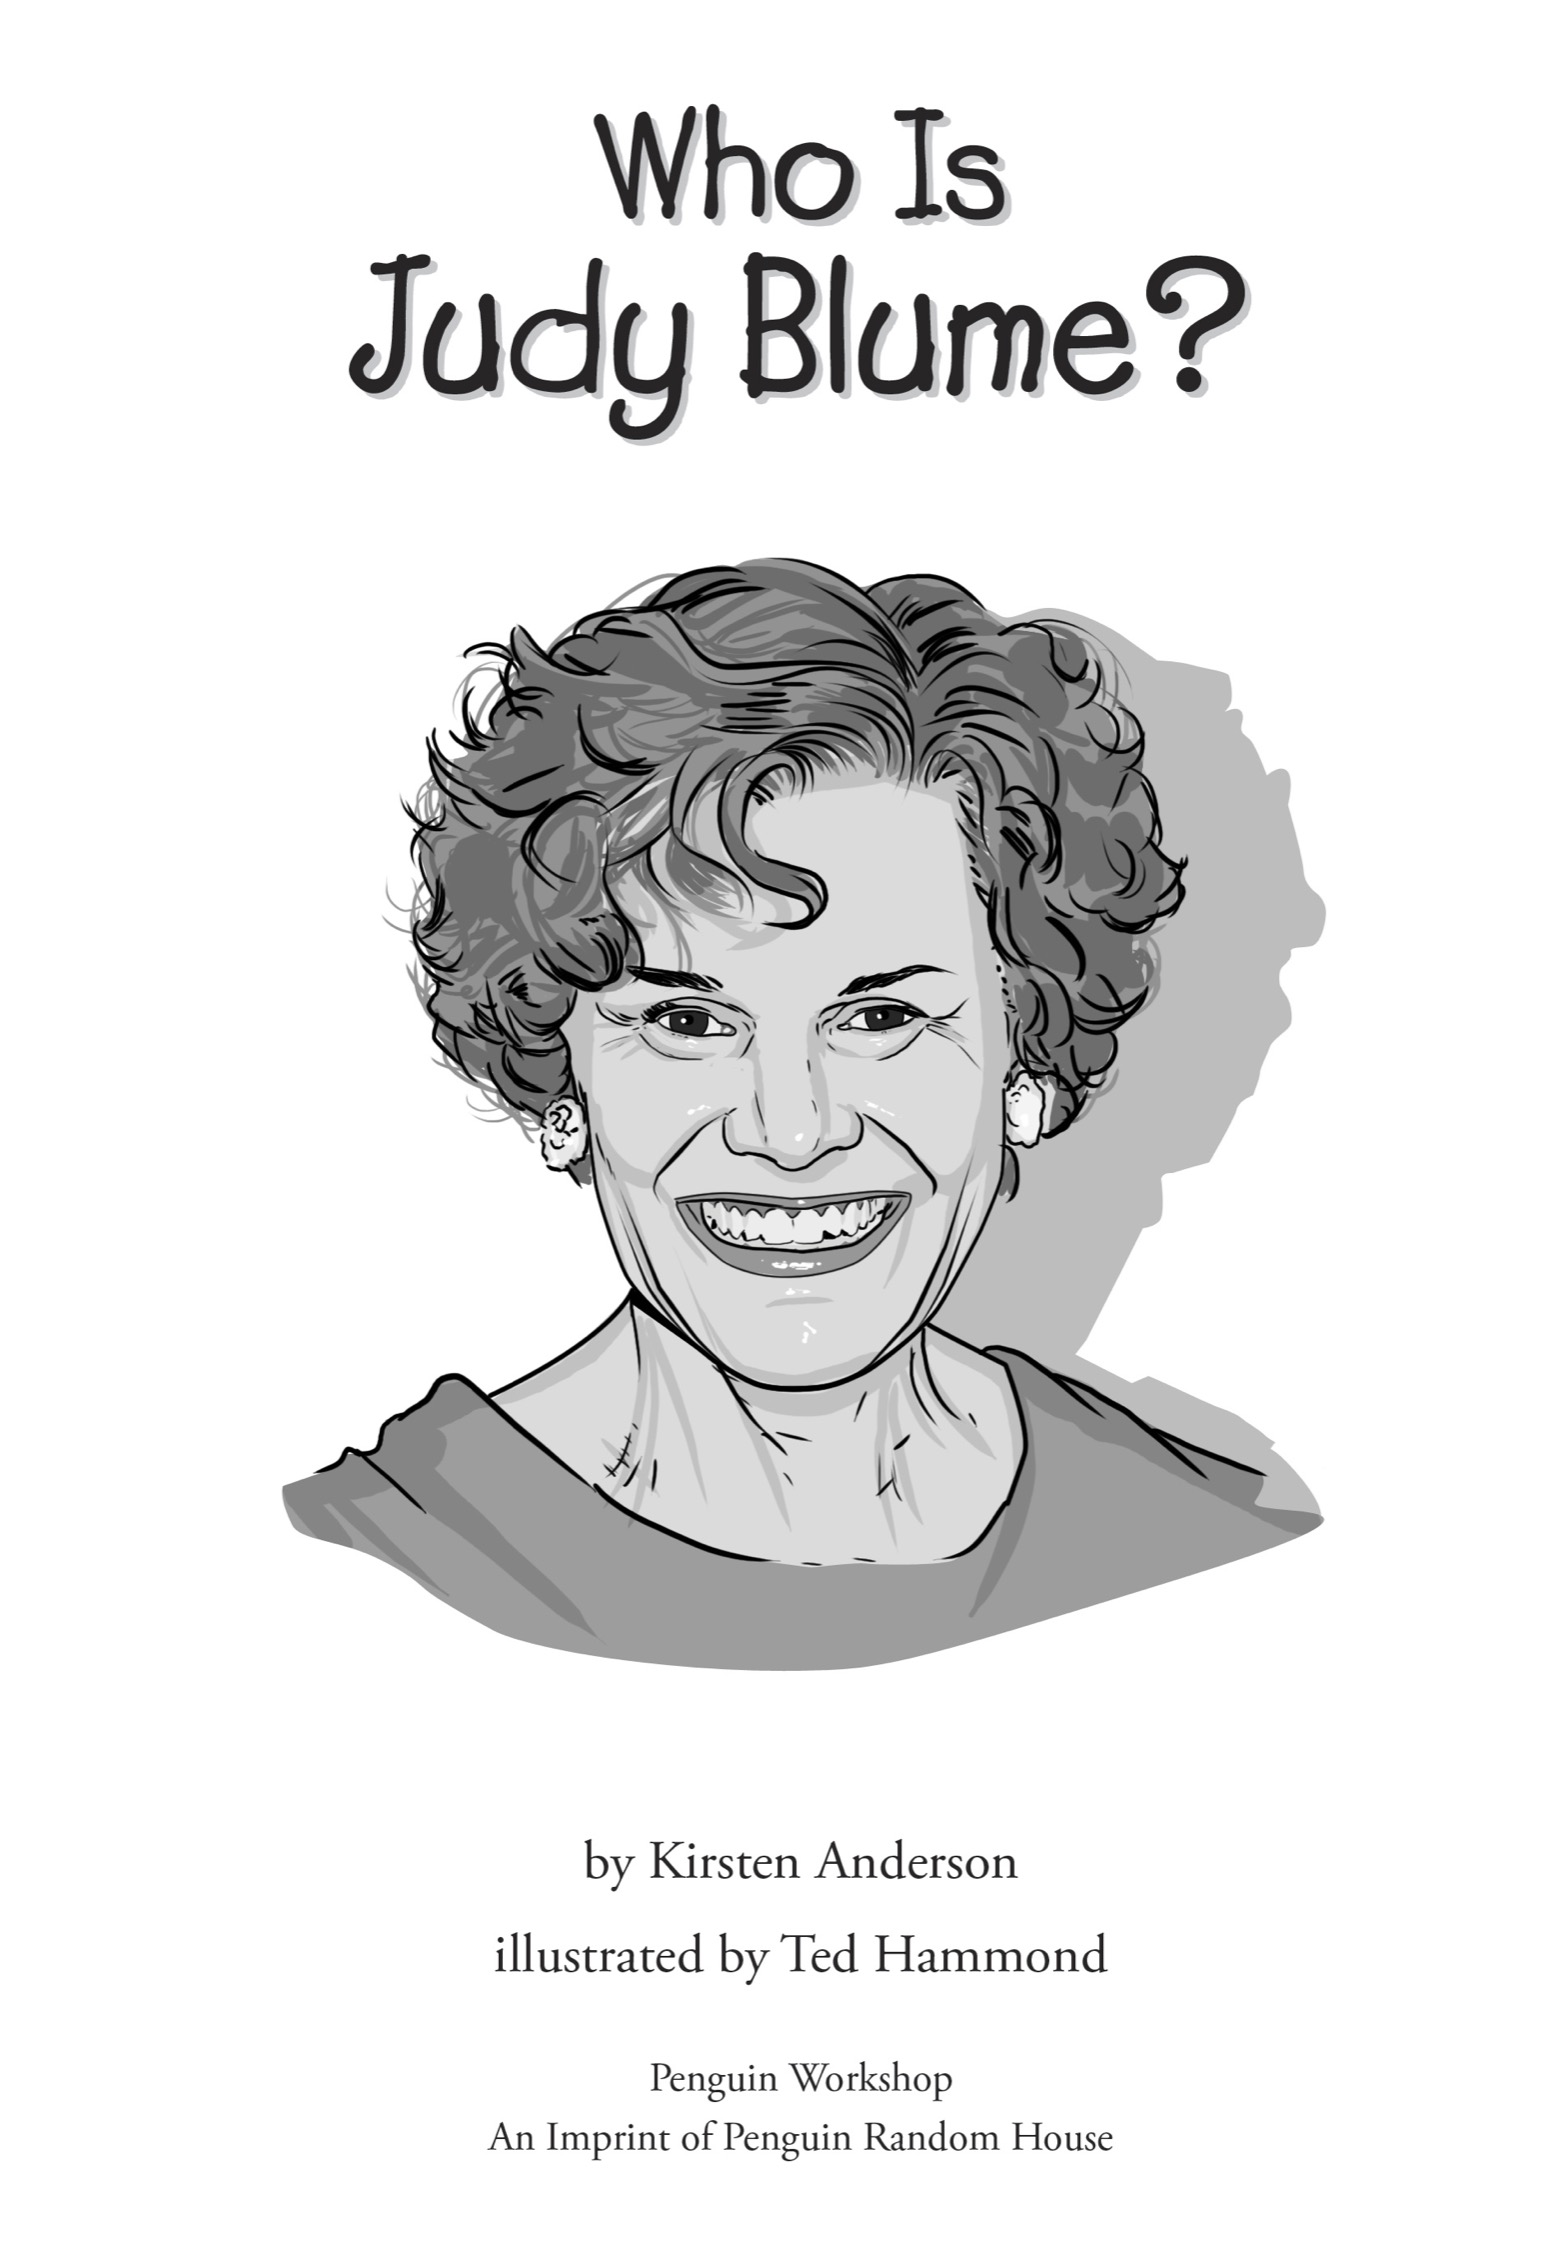 Book title, Who Is Judy Blume?, author, Kirsten Anderson, imprint, Penguin Workshop